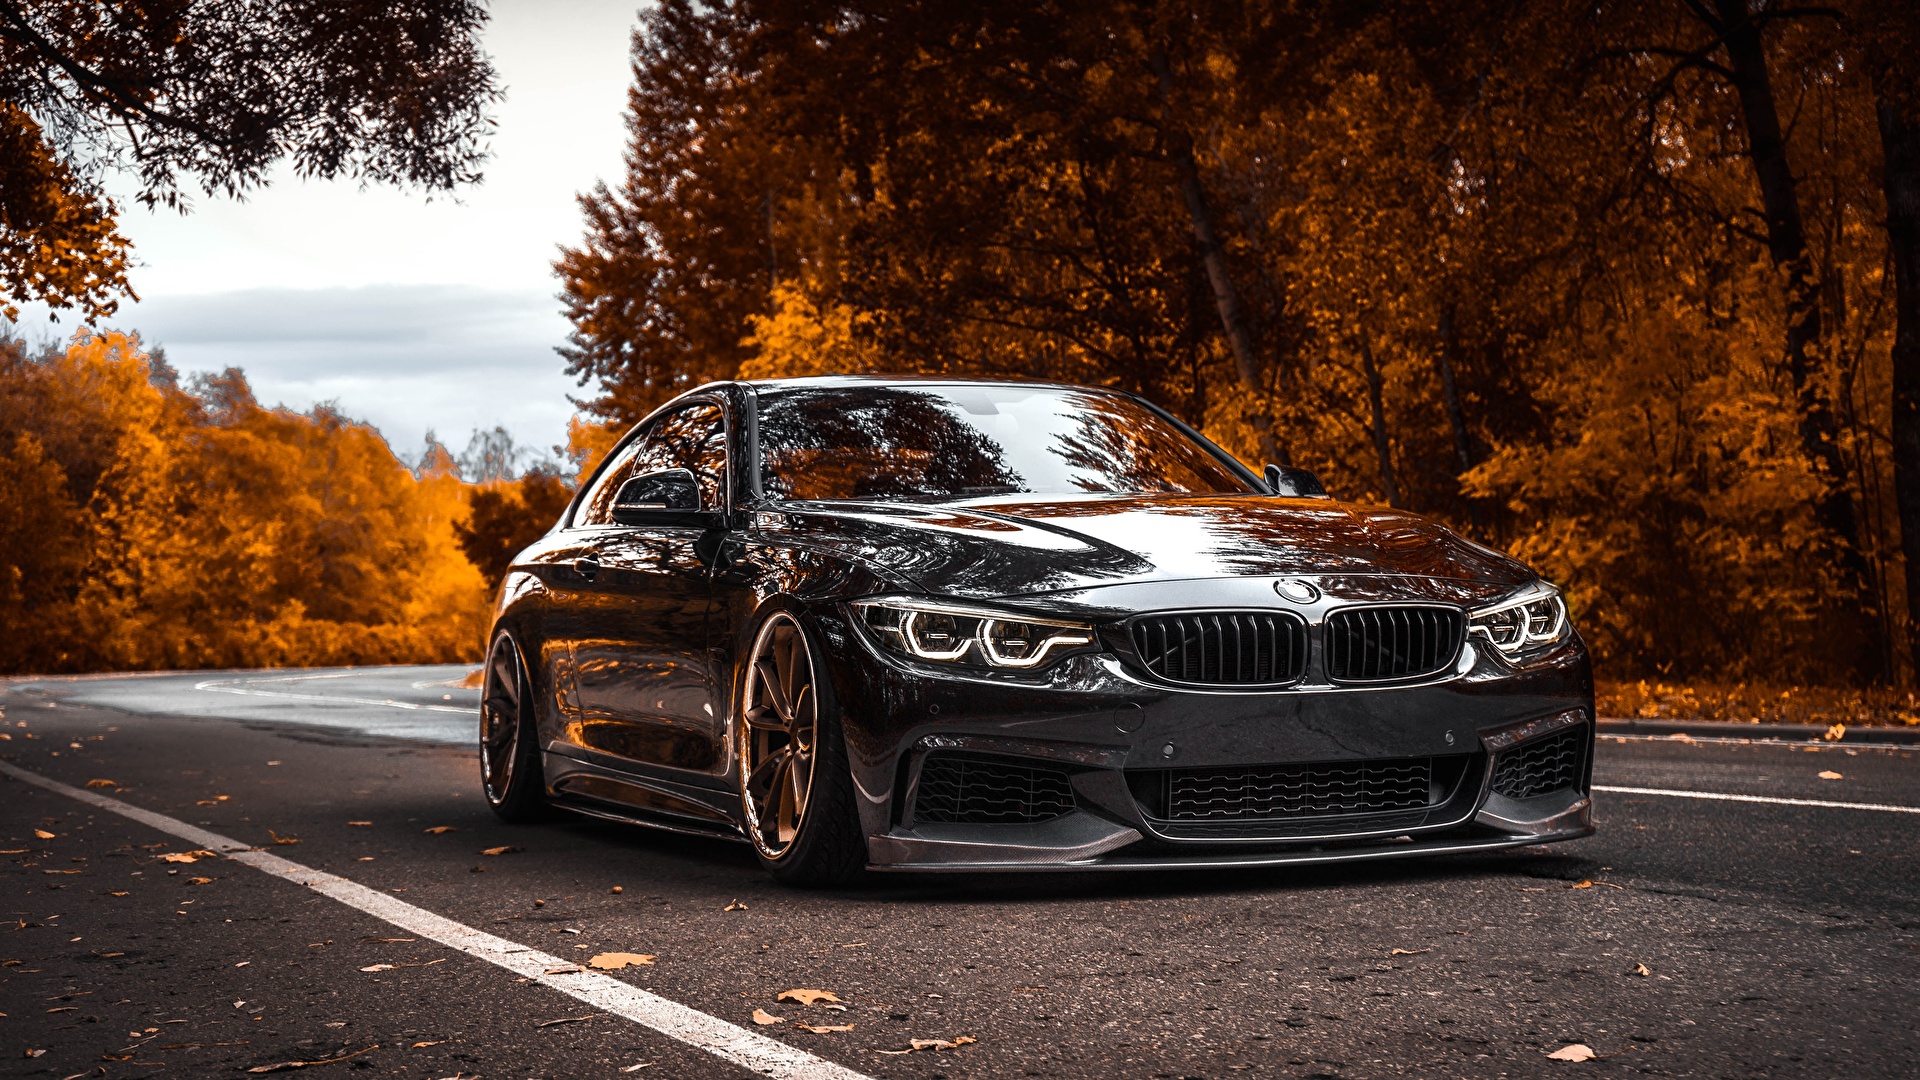 General 1920x1080 forest black BMW orange tuning car German cars frontal view headlights leaves sky trees clouds vehicle road fall